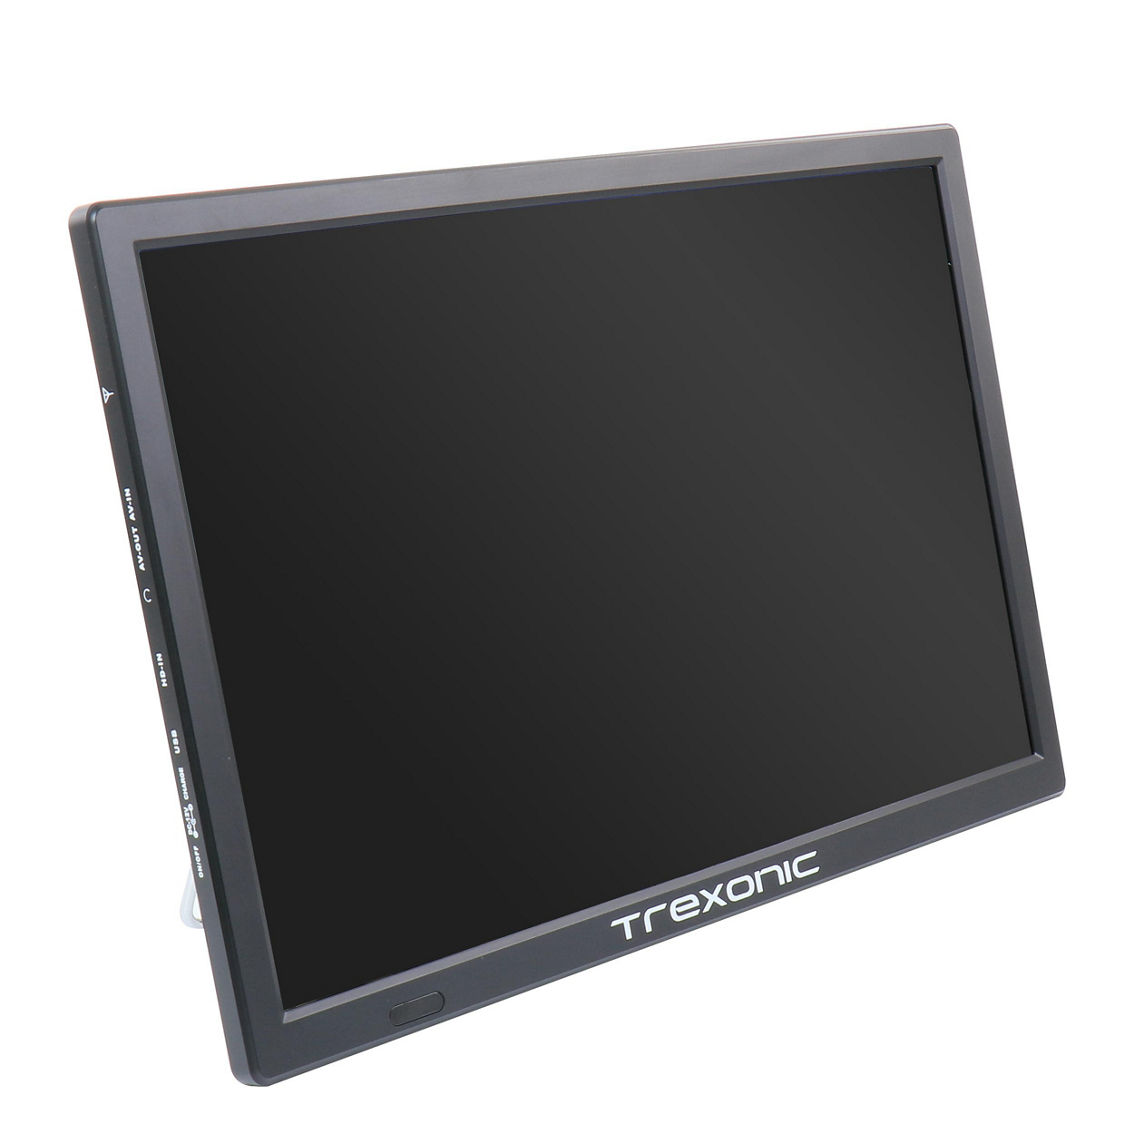 Trexonic Portable Rechargeable 15.4 Inch LED TV with HDMI, SD/MMC, USB, AV In/Ou - Image 3 of 5